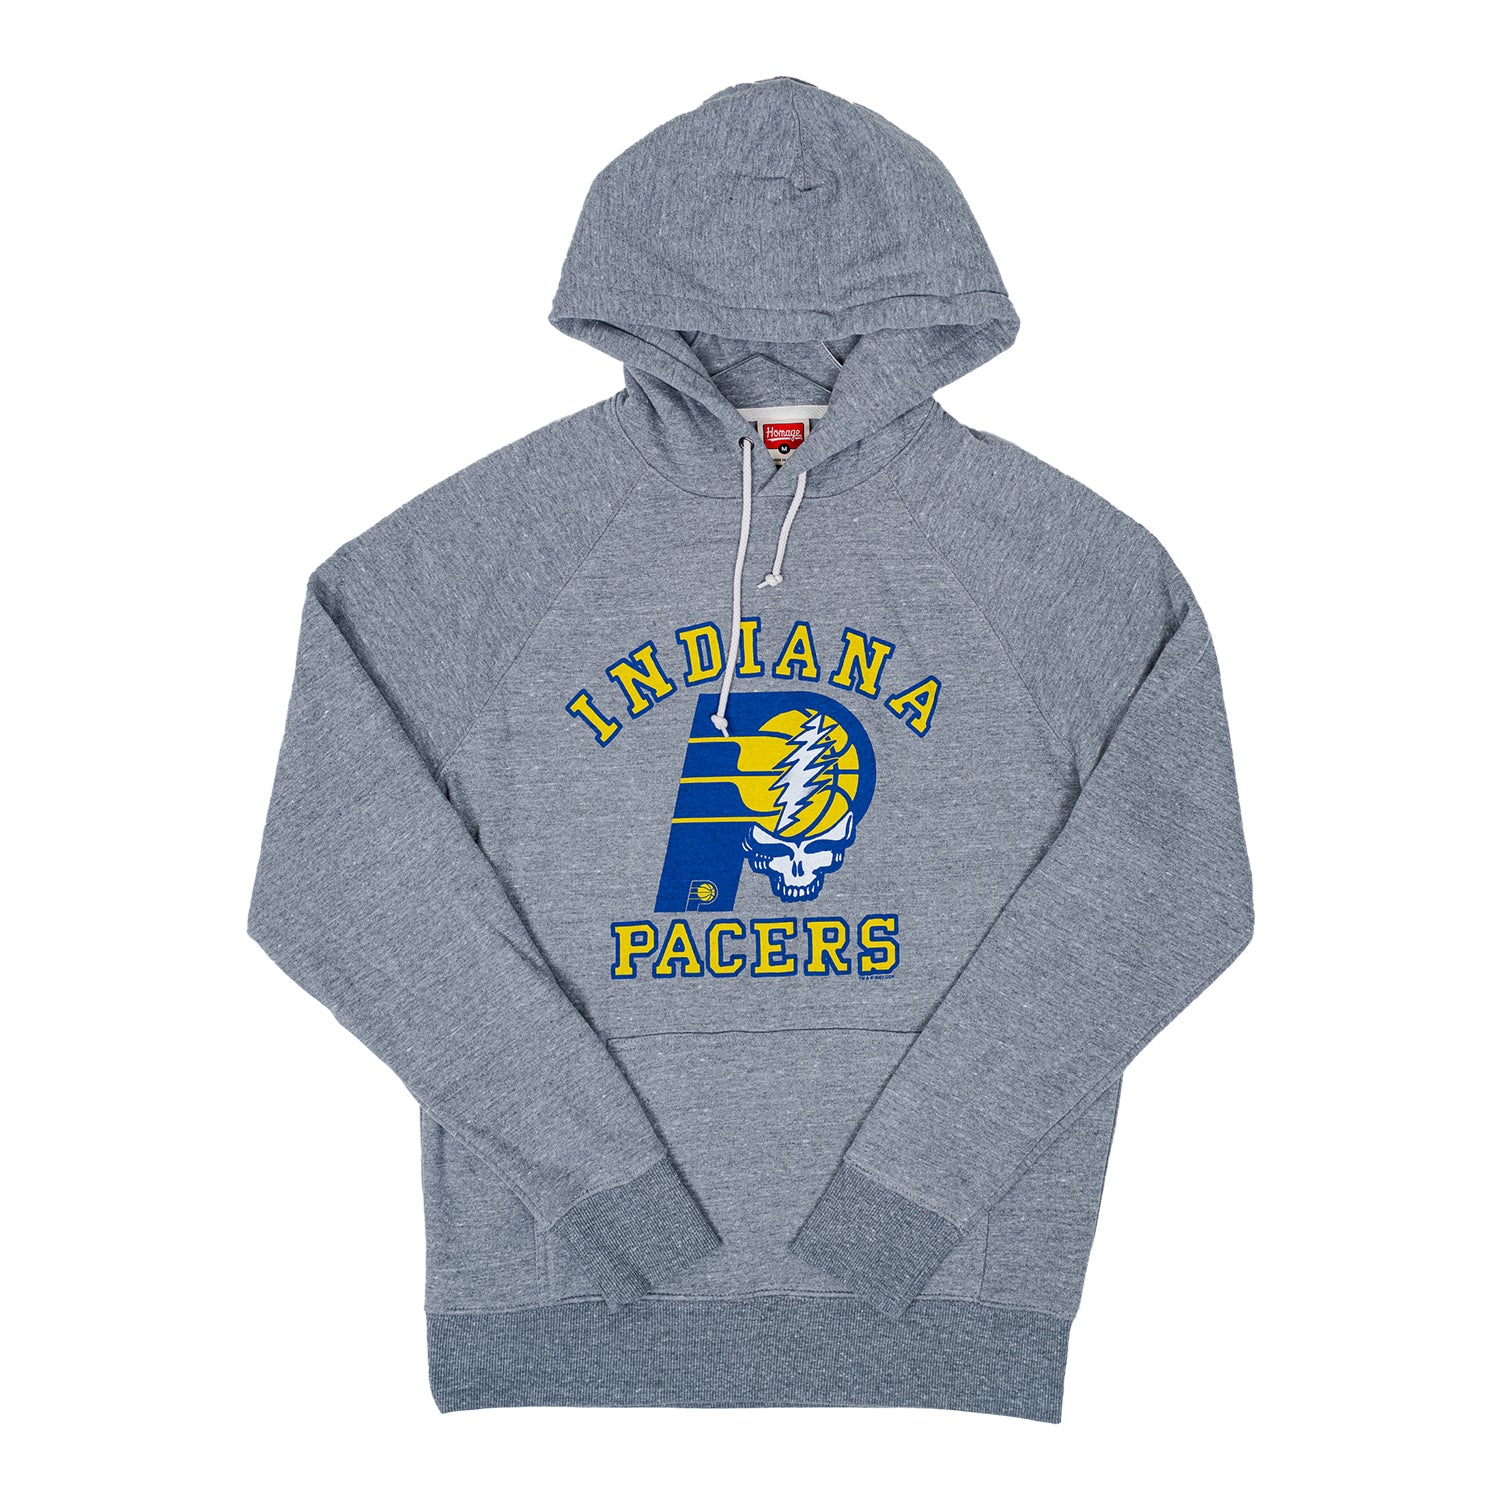 Adult Indiana Pacers Grateful Dead Hooded Fleece by Homage